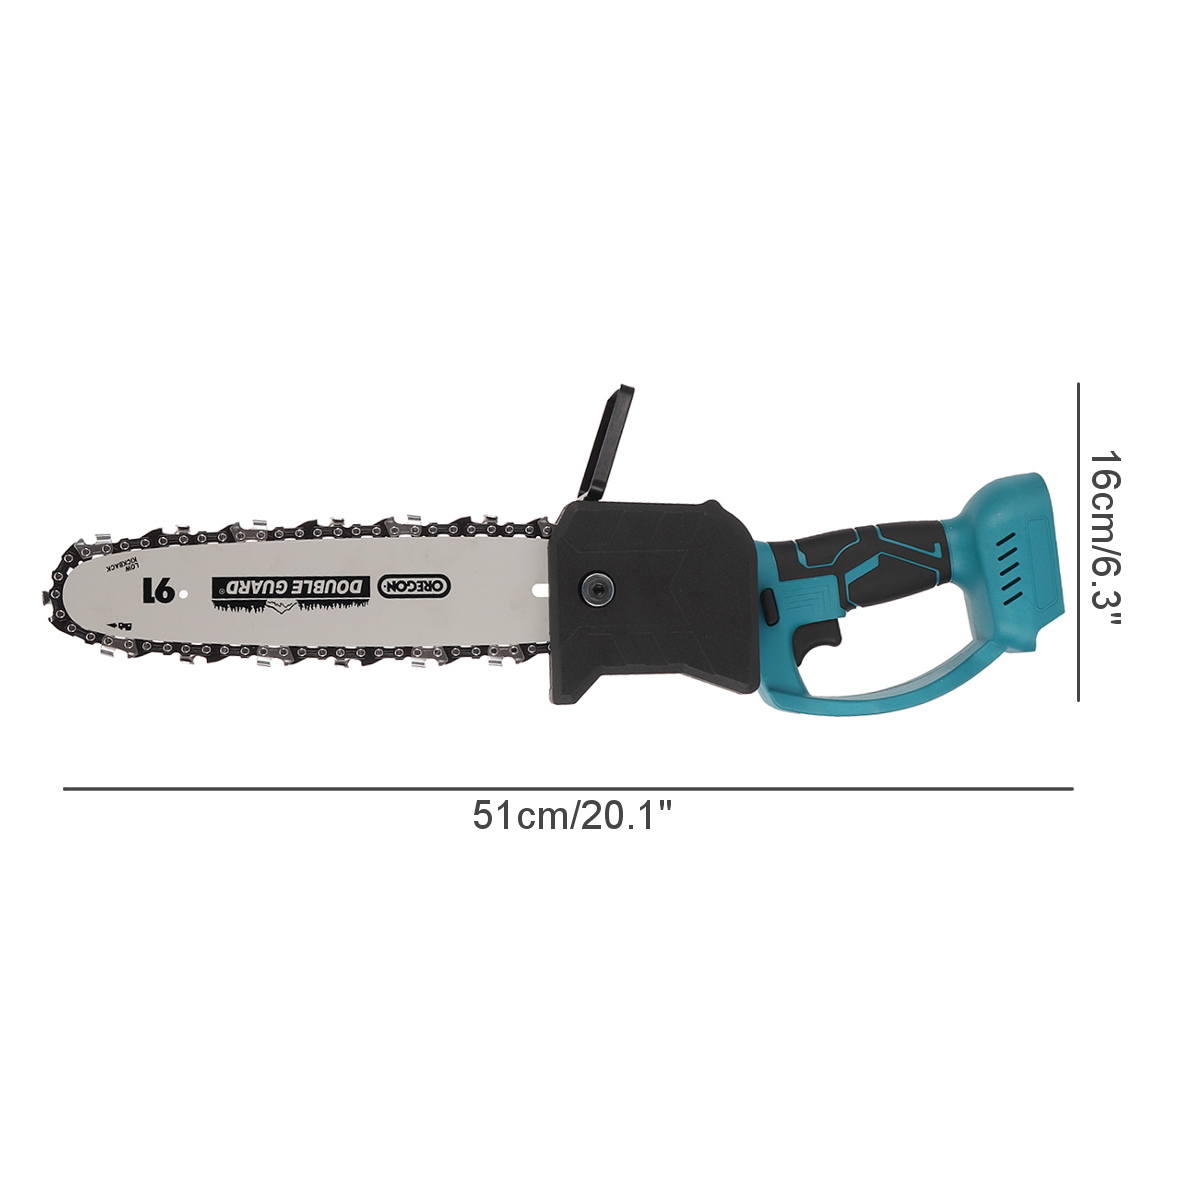 10-Inch-588VF-Electric-Chain-Saw-Woodworking-Tool-Portable-Chainsaws-w-1pc2pcs-Battery-For-Cutting-P-1823938-10